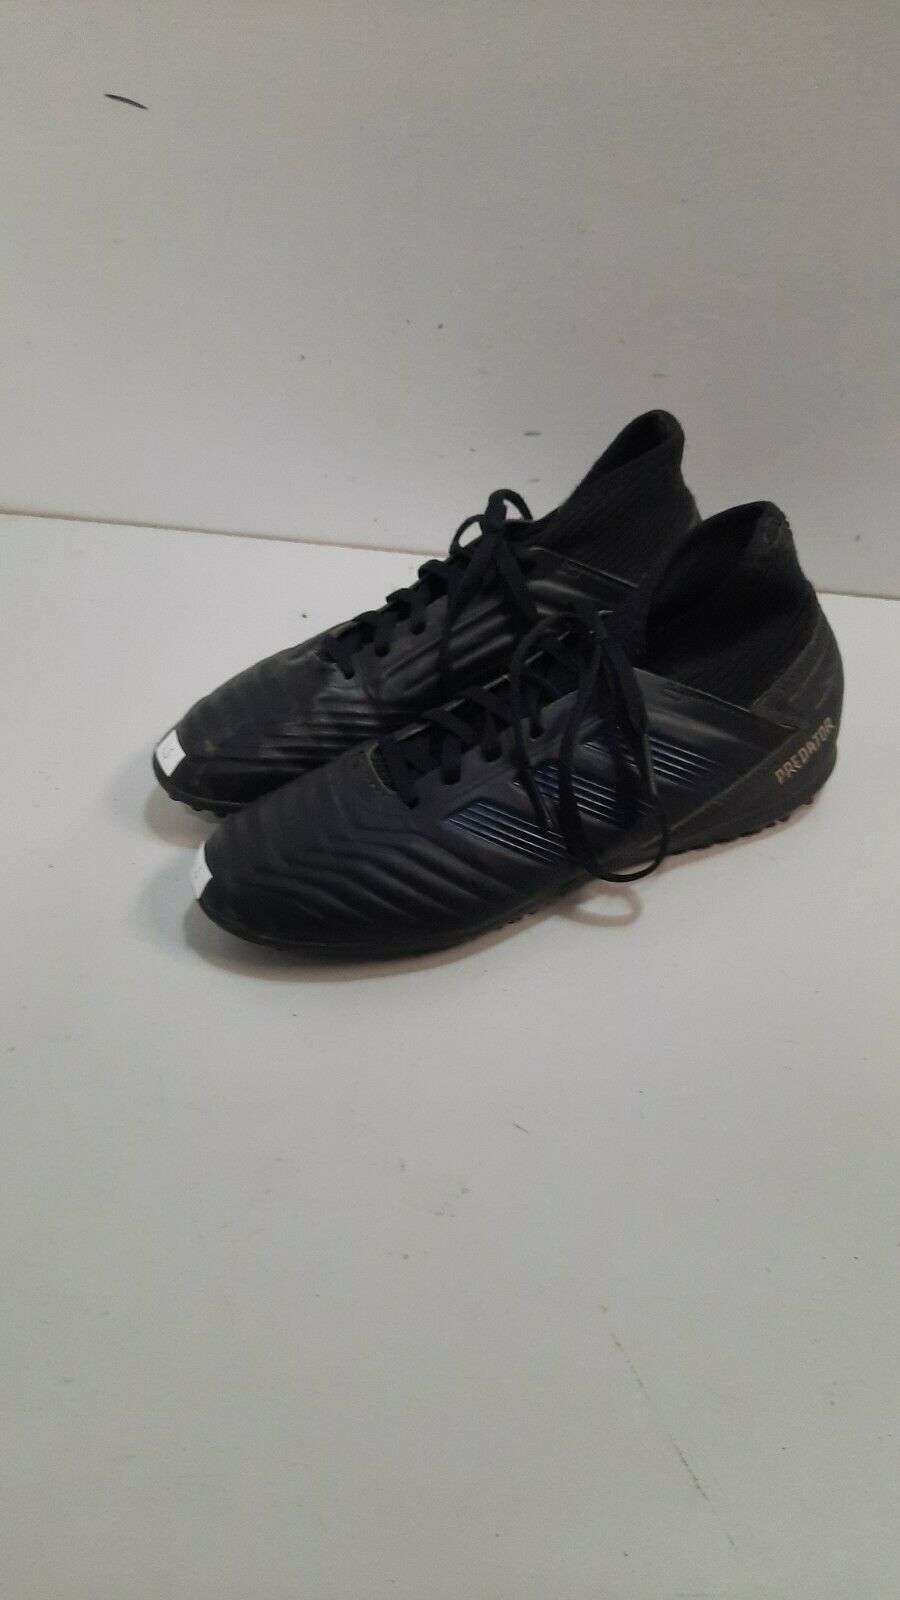 Adidas Predator Indoor Cleats Size 4.5 Pre-owned